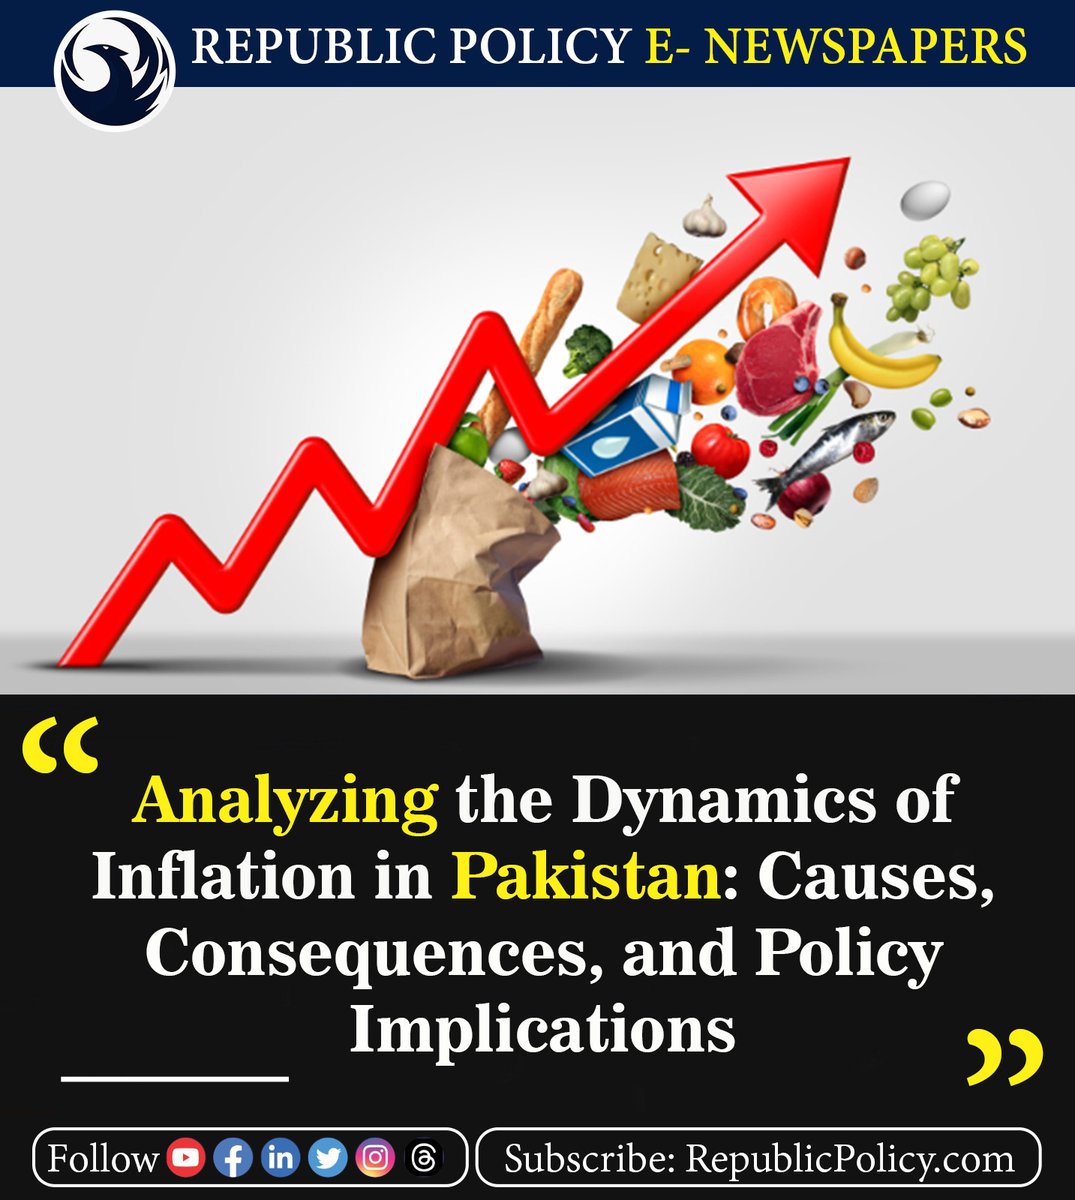 Inflation is a critical economic phenomenon that affects the lives of individuals, businesses, and governments worldwide.

Read more: republicpolicy.com/analyzing-the-…

#InflationAnalysis #PakistanInflation #PolicyImplications #InflationEffects #News